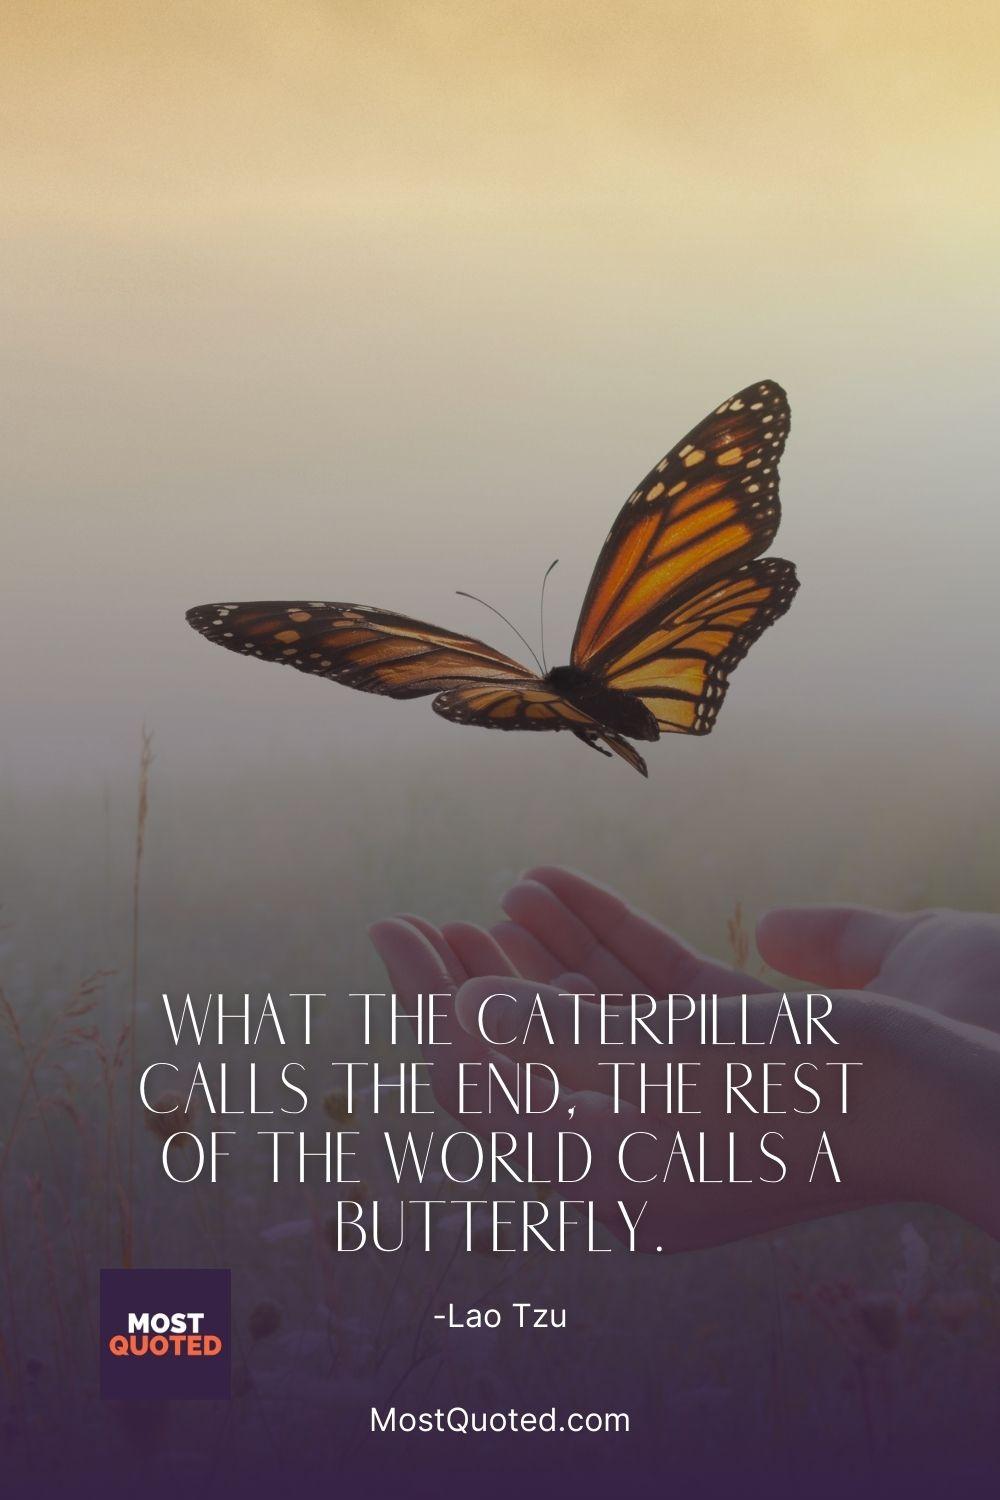 What the caterpillar calls the end, the rest of the world calls a butterfly. - Lao Tzu